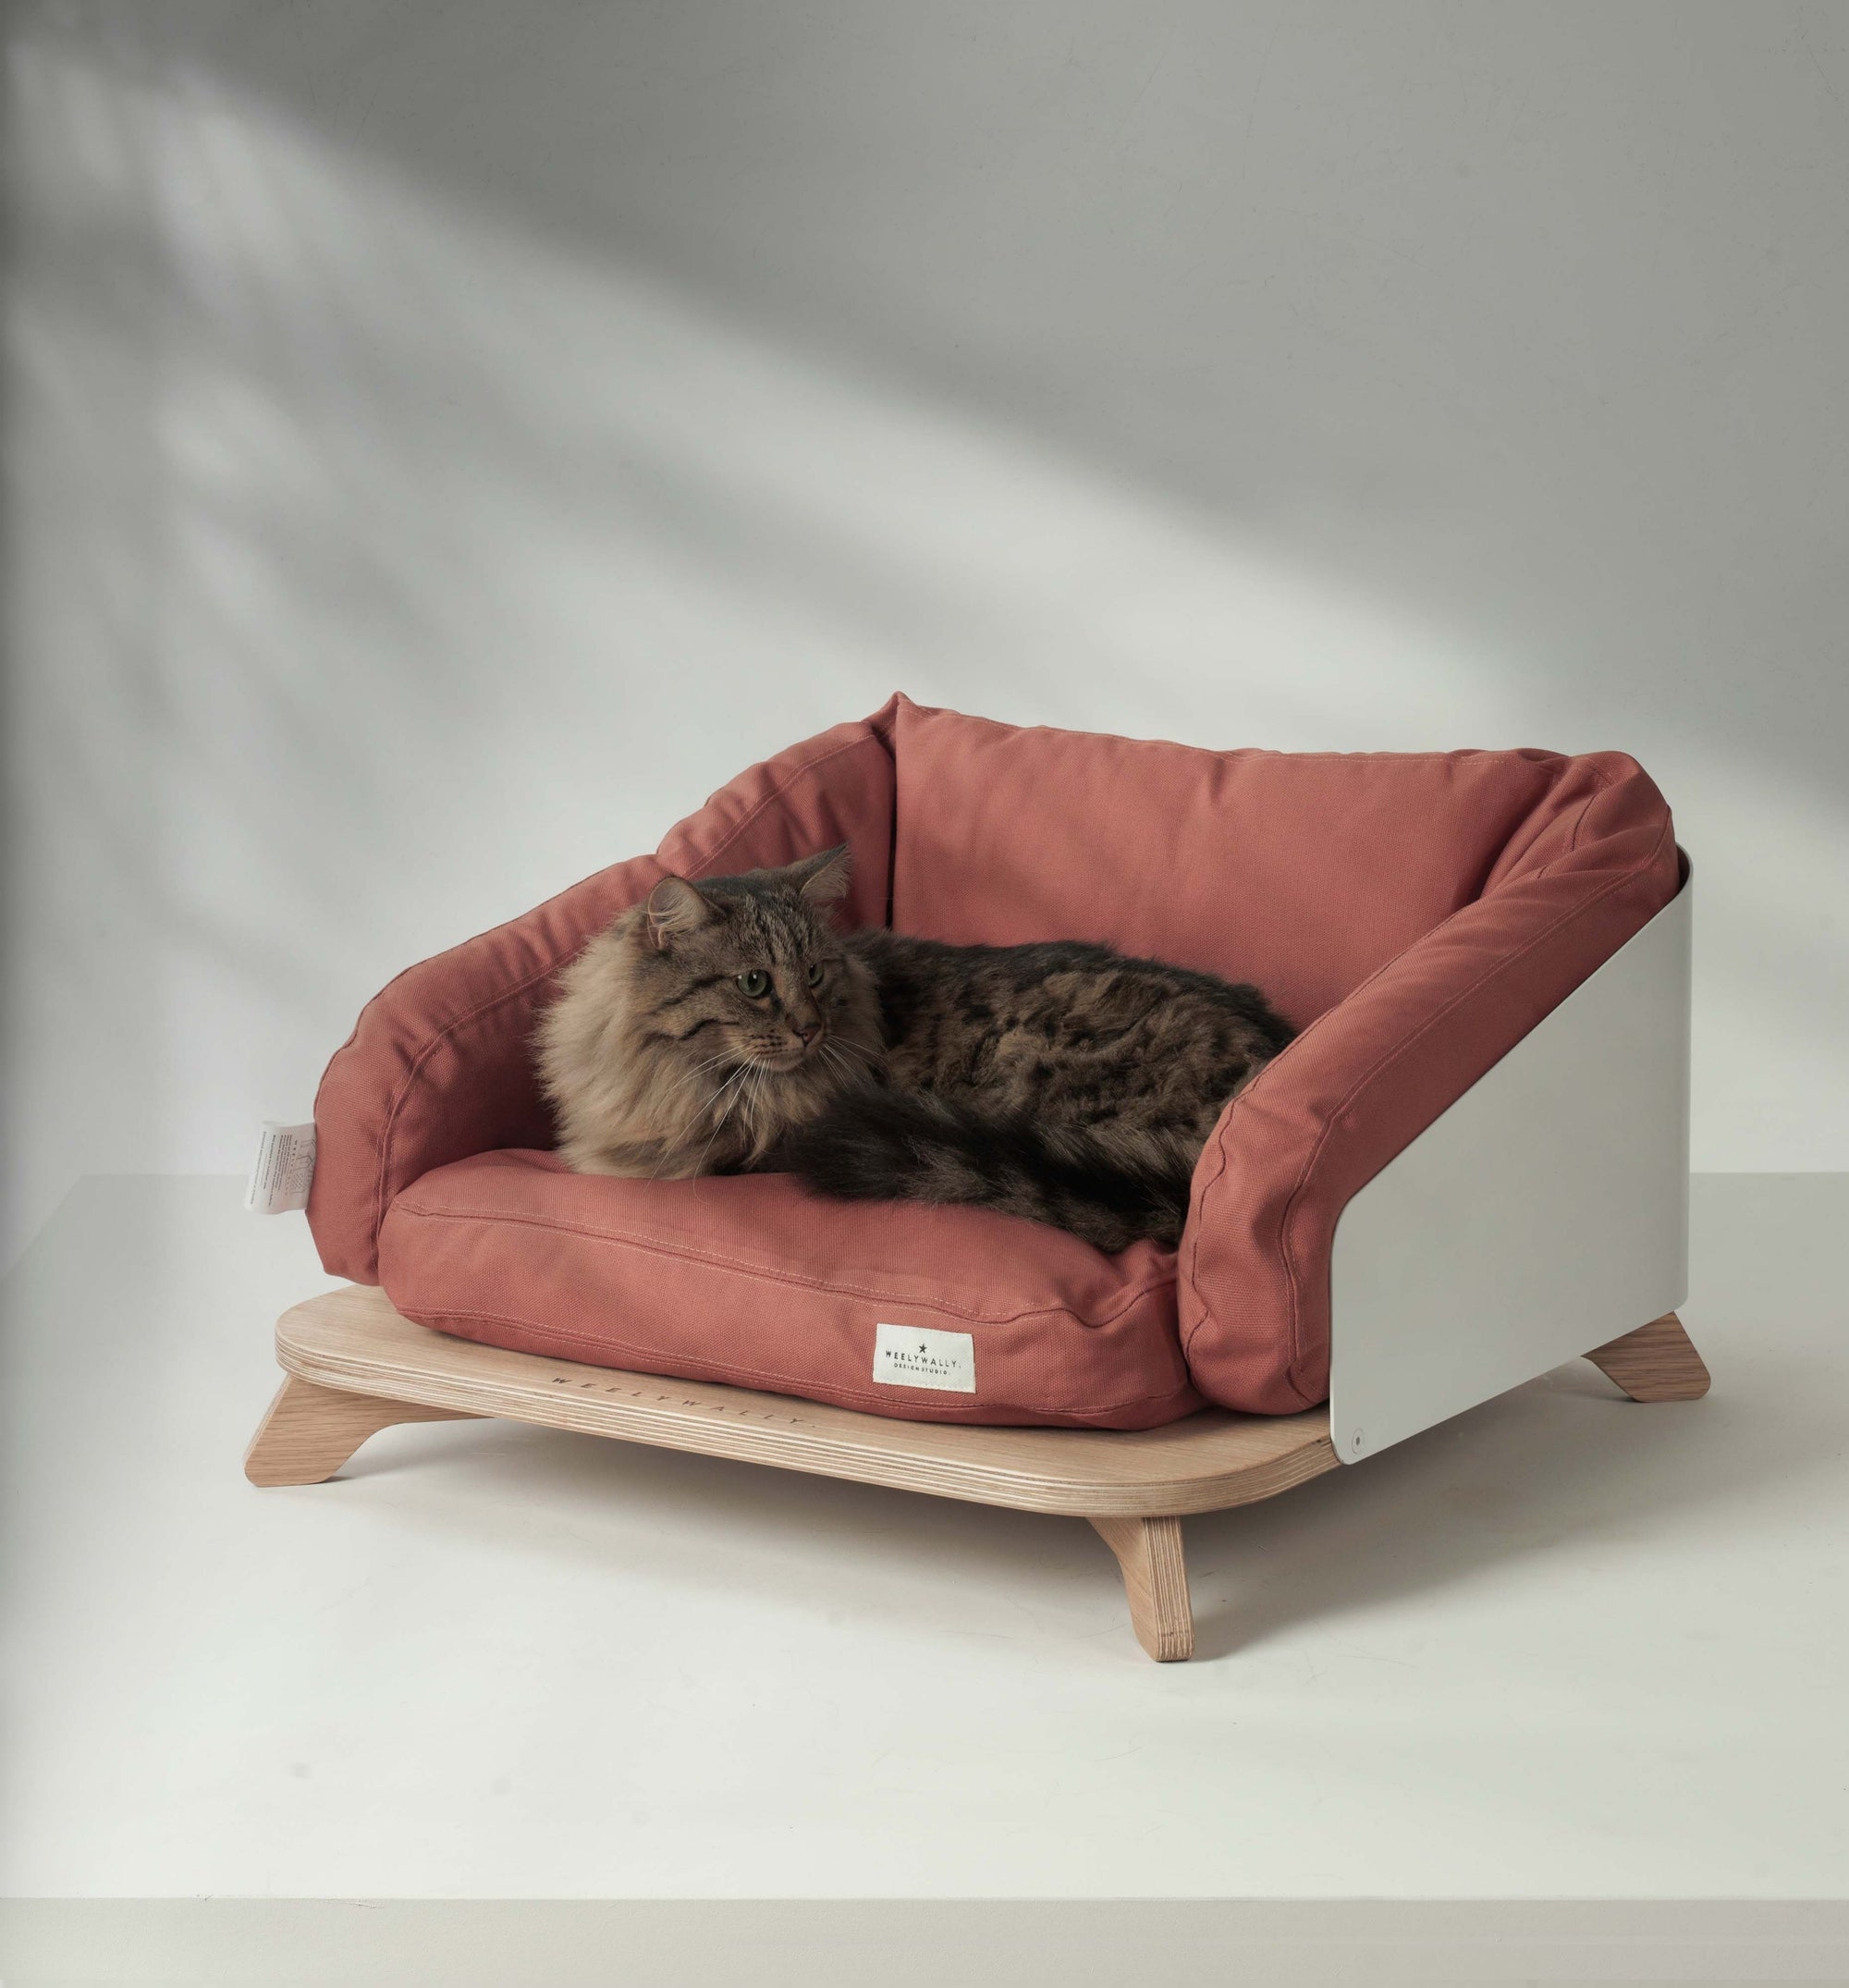 Odense is the perfect sofa, couch, bed for your dog or cat to enjoy!